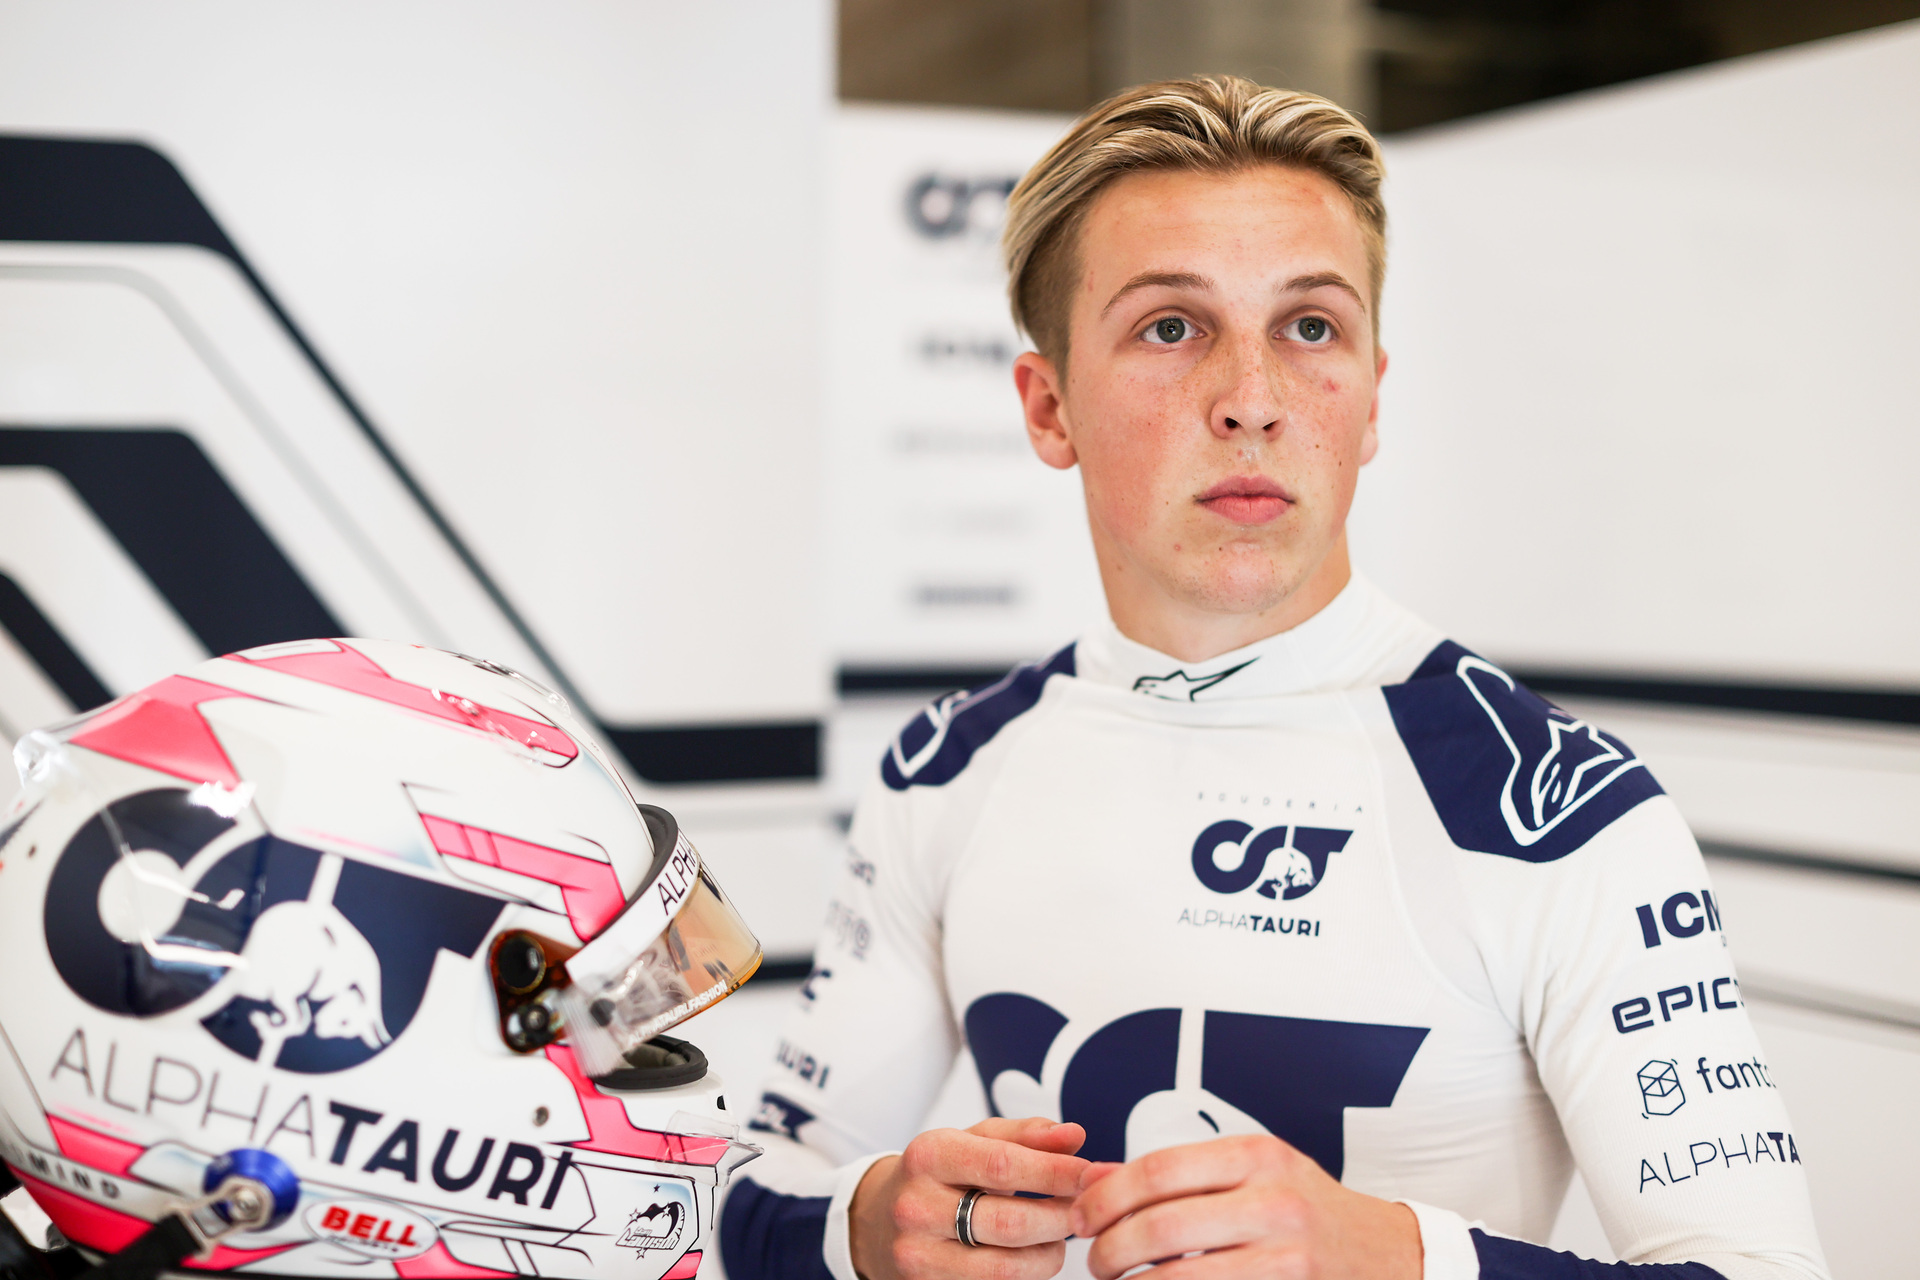 Motorsport Liam Lawson hoping to make the most of Formula 1 drive this weekend for AlphaTauri